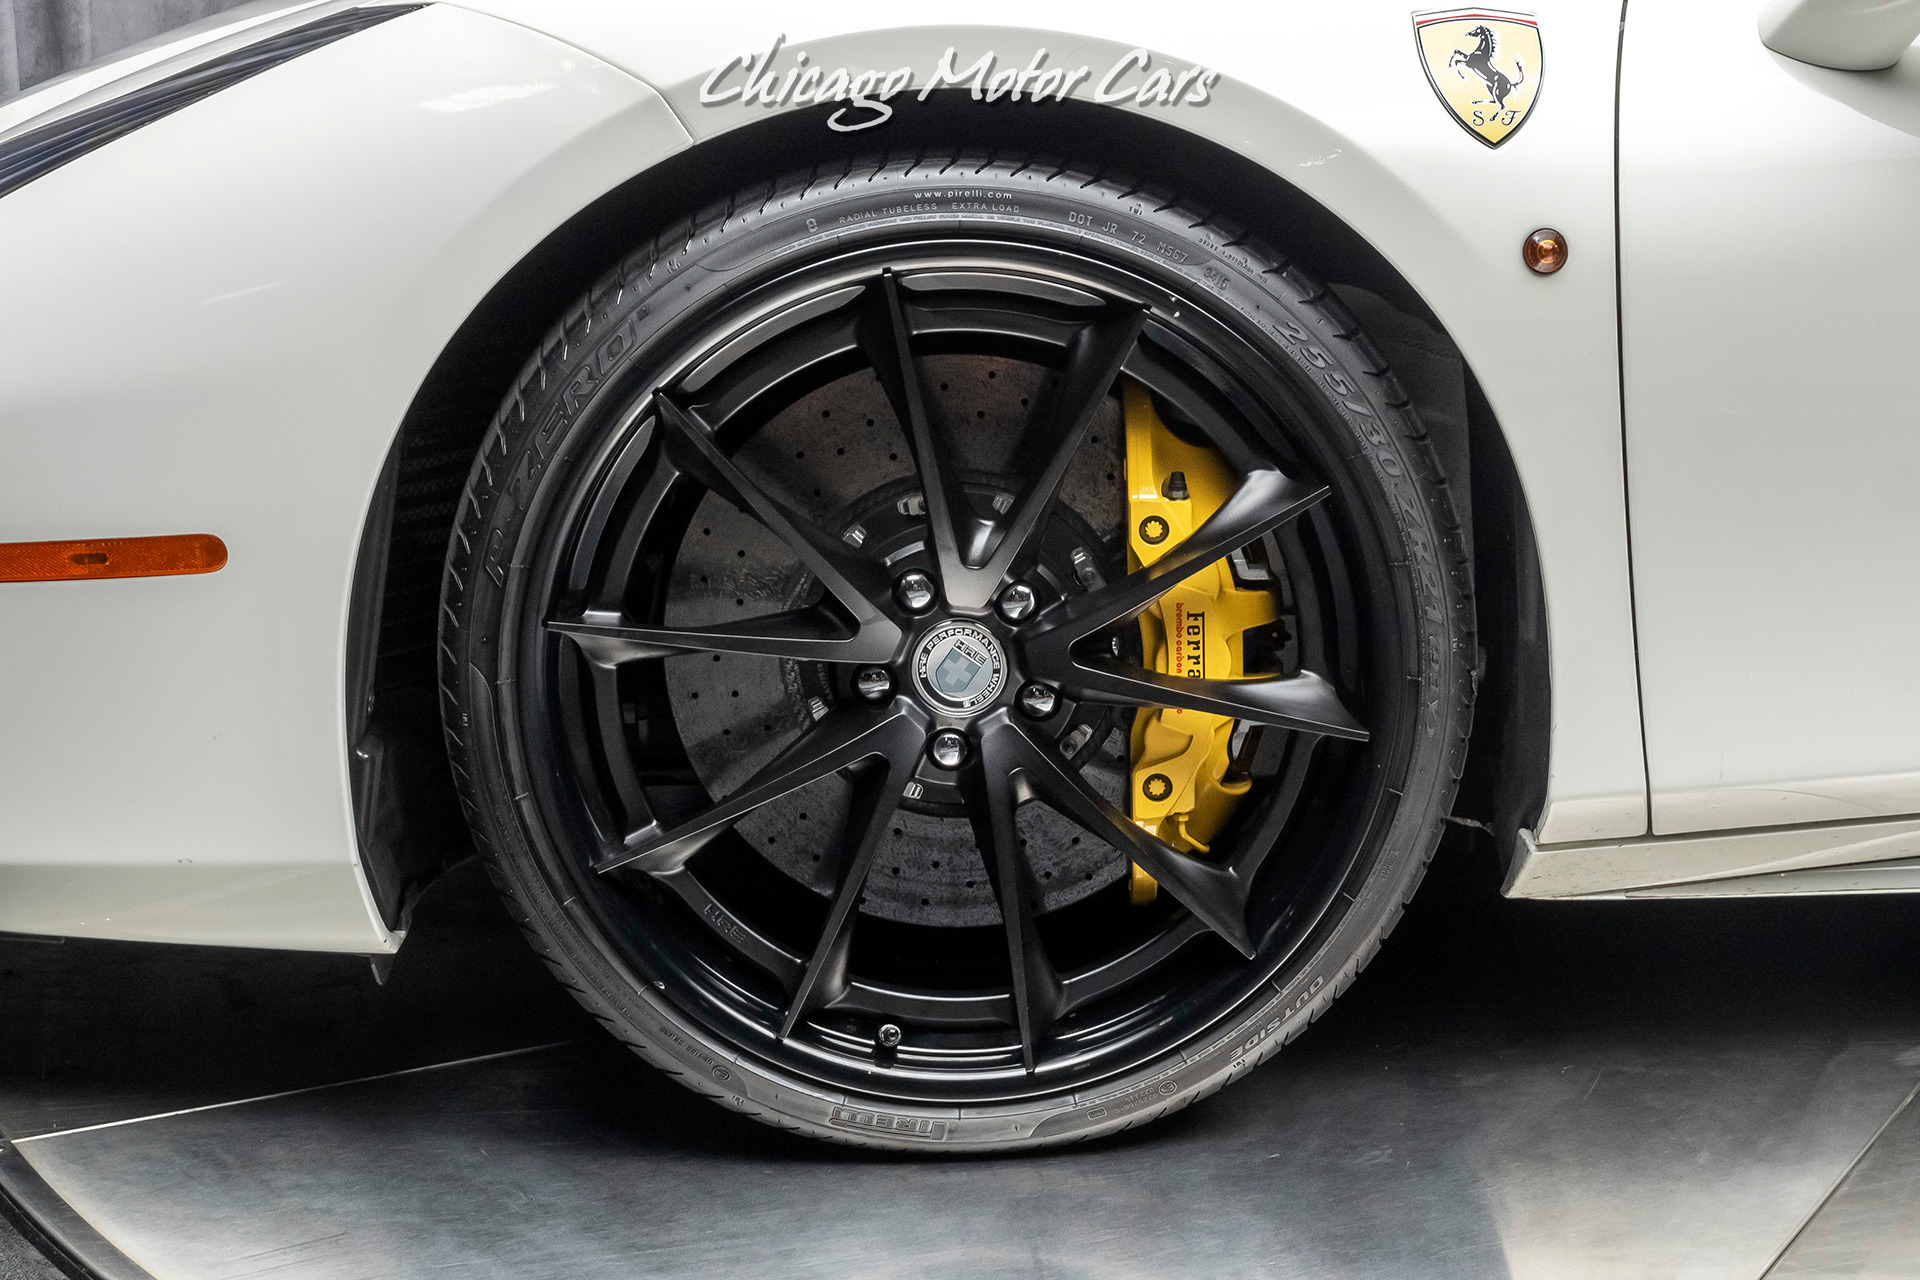 Used-2018-Ferrari-488-GTB-Coupe-MSRP-320k-HRE-Upgraded-Wheels-LOADED-Stunning